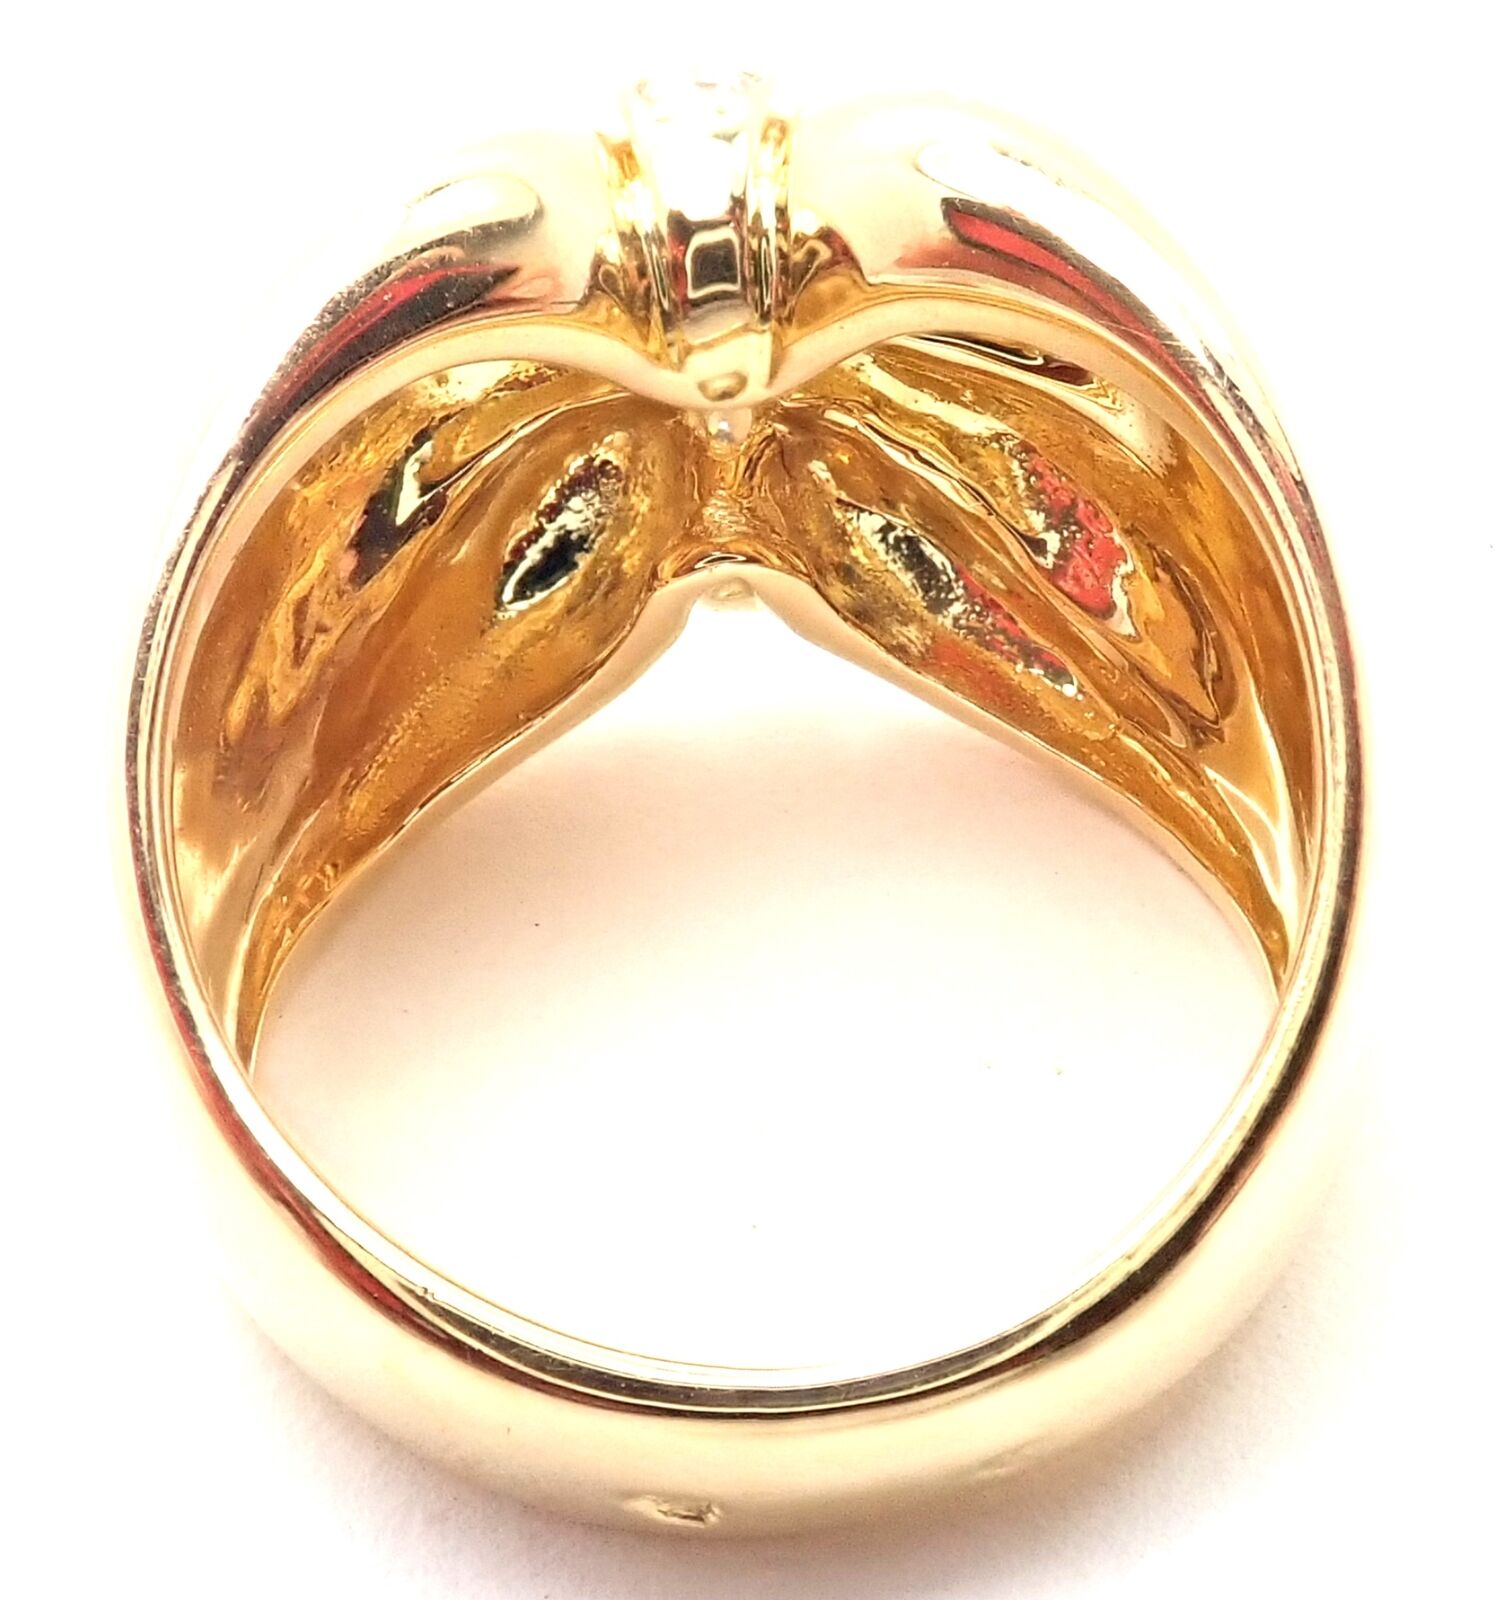 Van Cleef & Arpels Jewelry & Watches:Fine Jewelry:Rings Rare! Authentic Van Cleef & Arpels 18k Yellow Gold Diamond Bow Design Band Ring